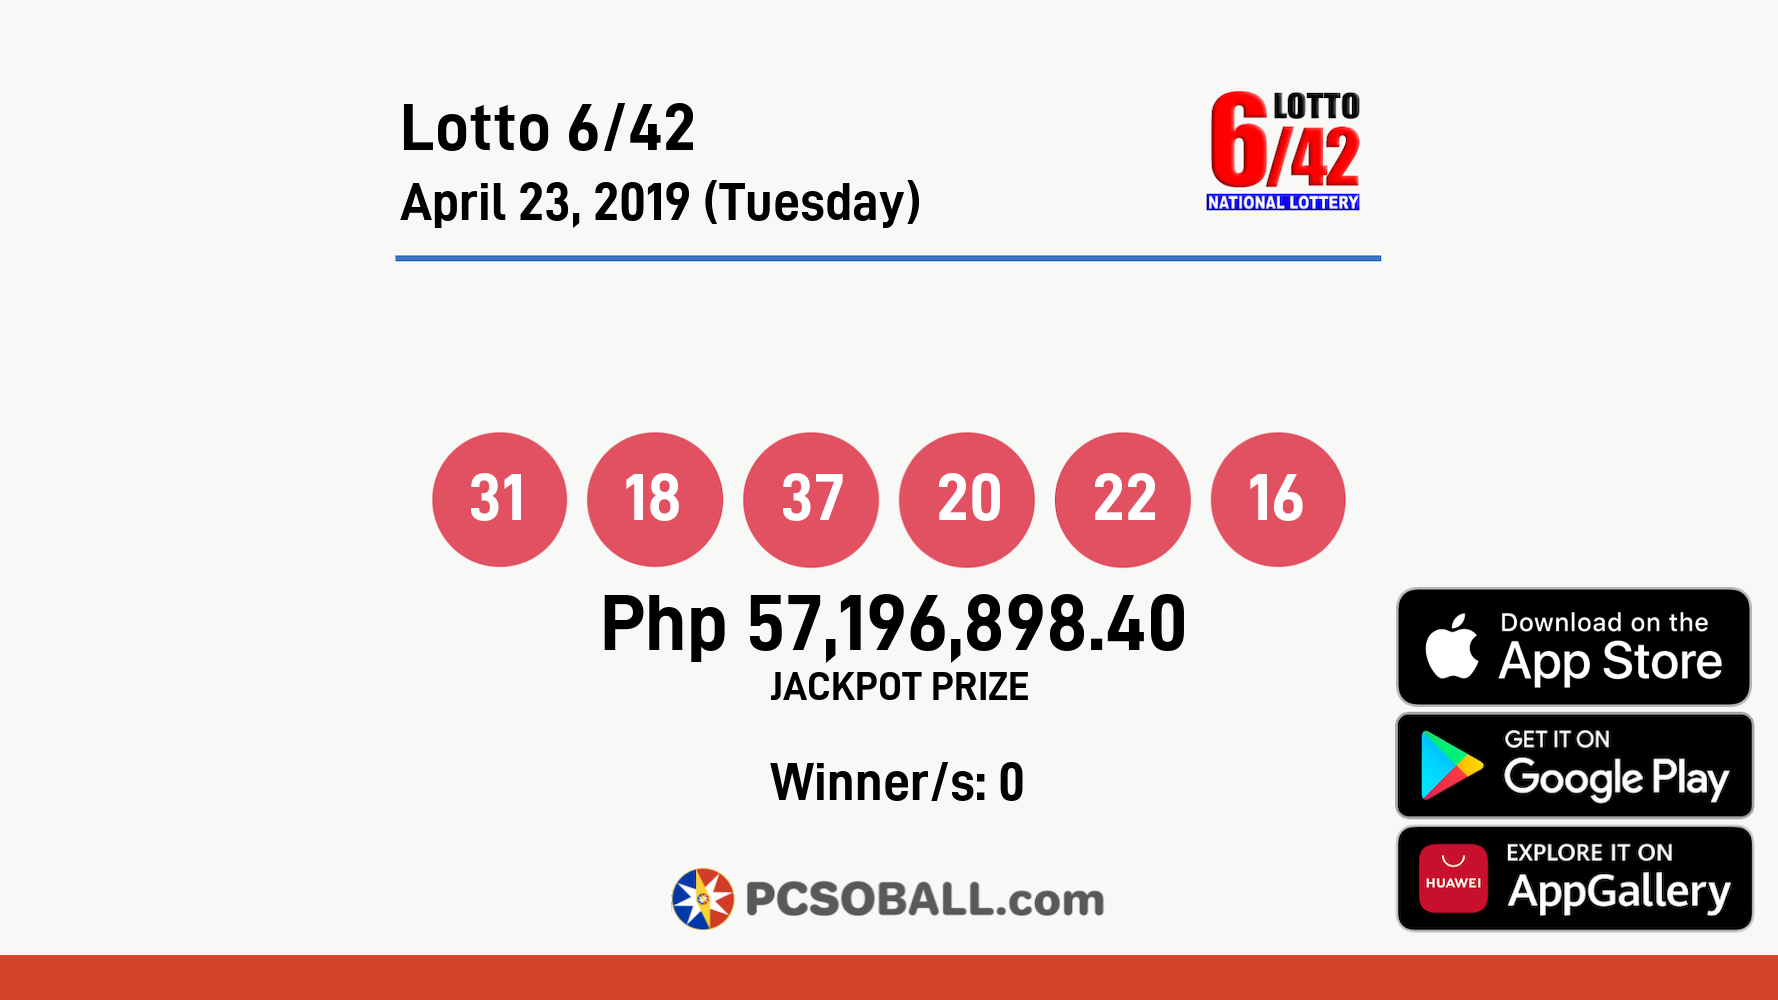 Lotto 6/42 April 23, 2019 (Tuesday) Result